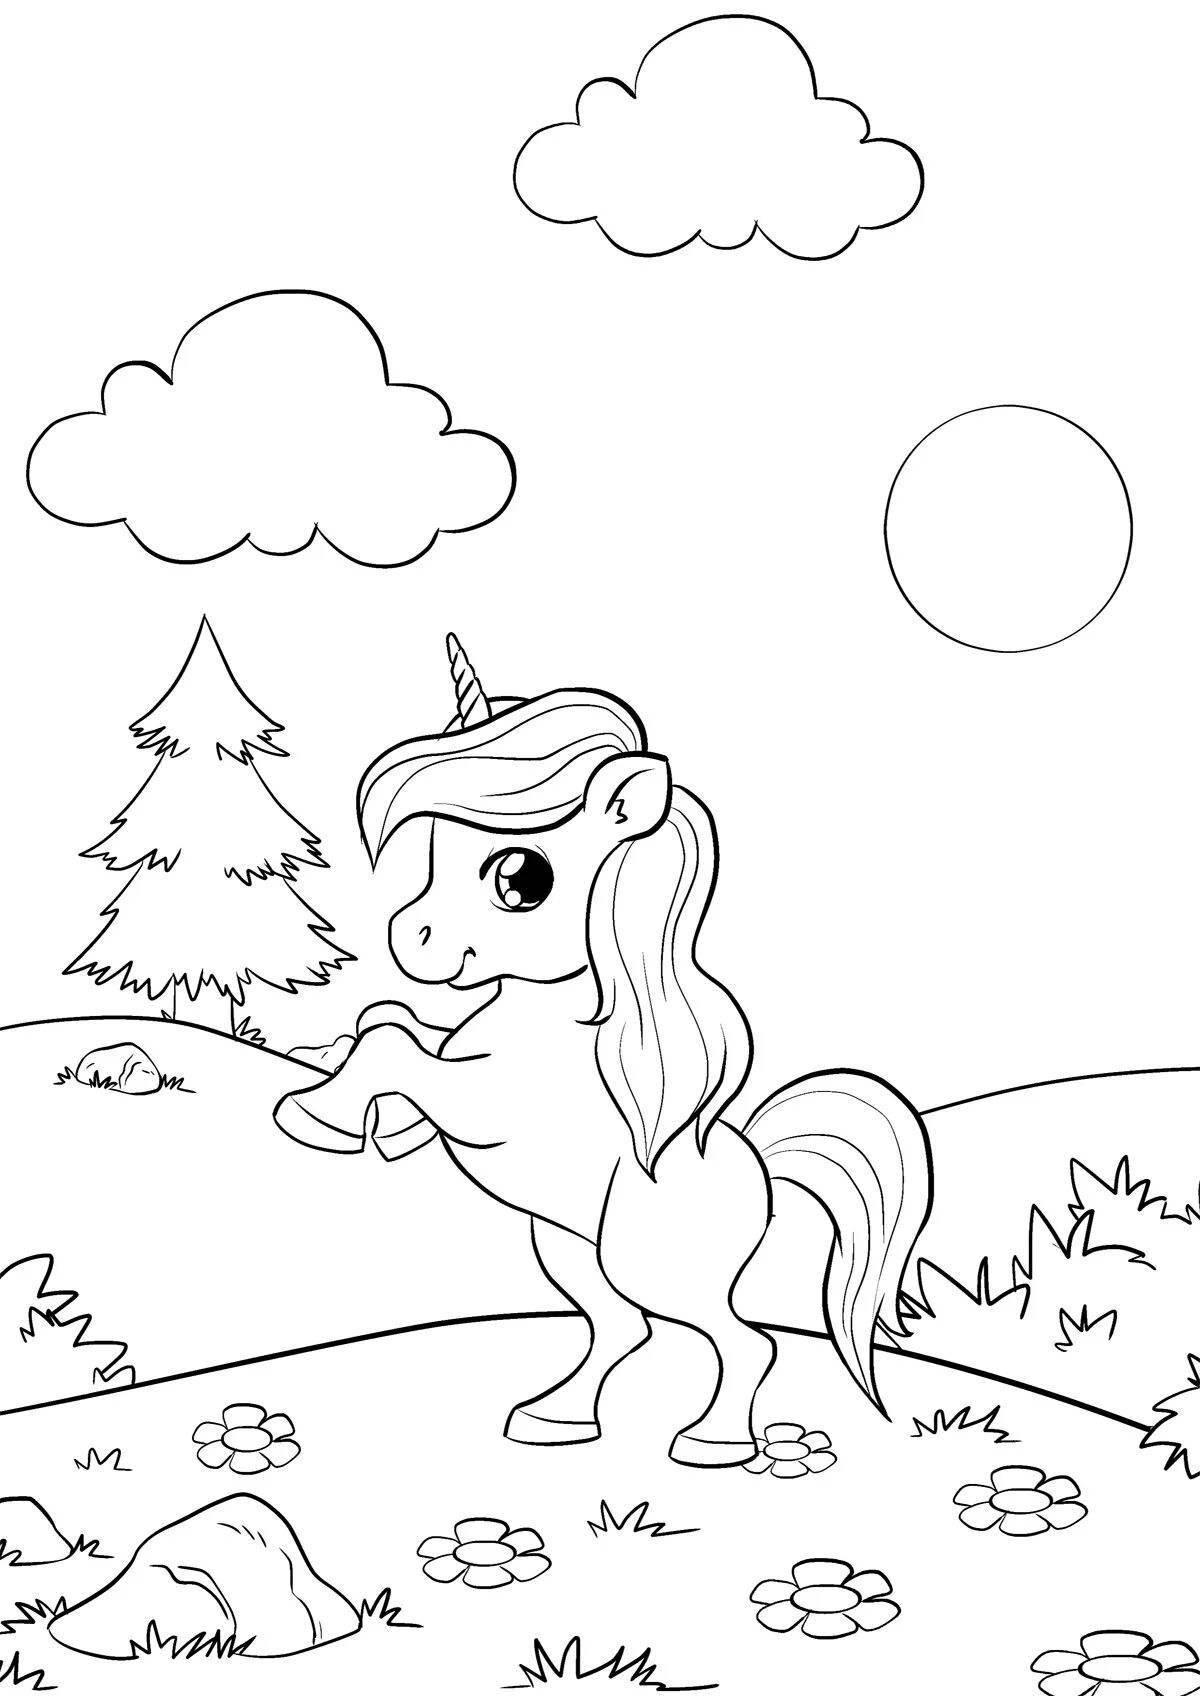 Great coloring book for 5-6 year olds for girls unicorns